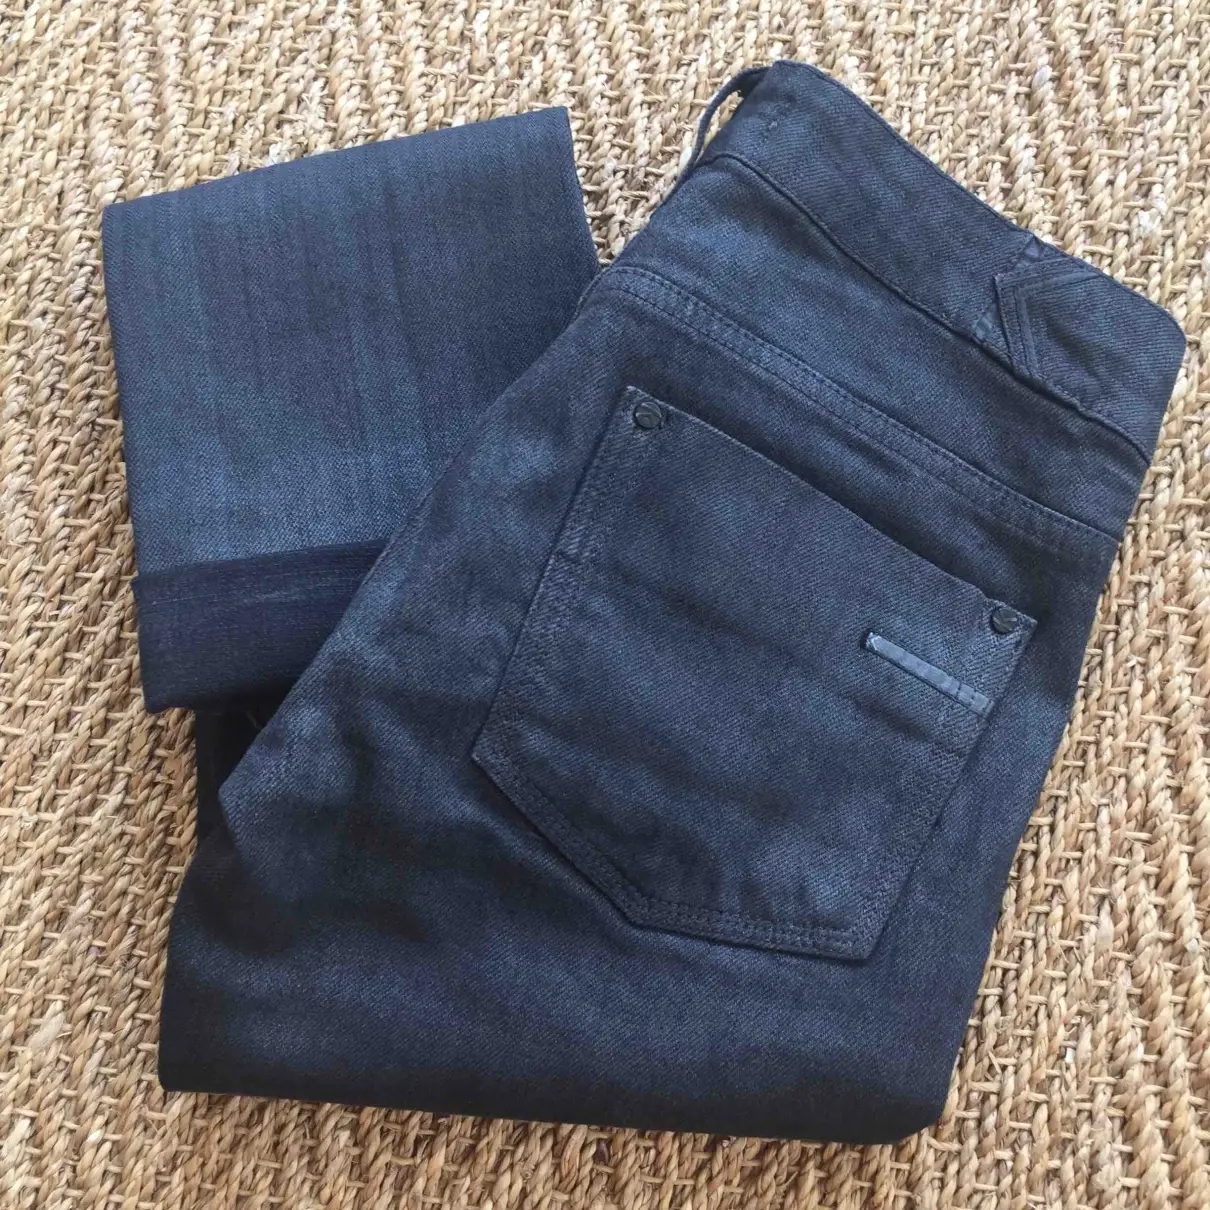 Karl Lagerfeld Straight jeans for sale